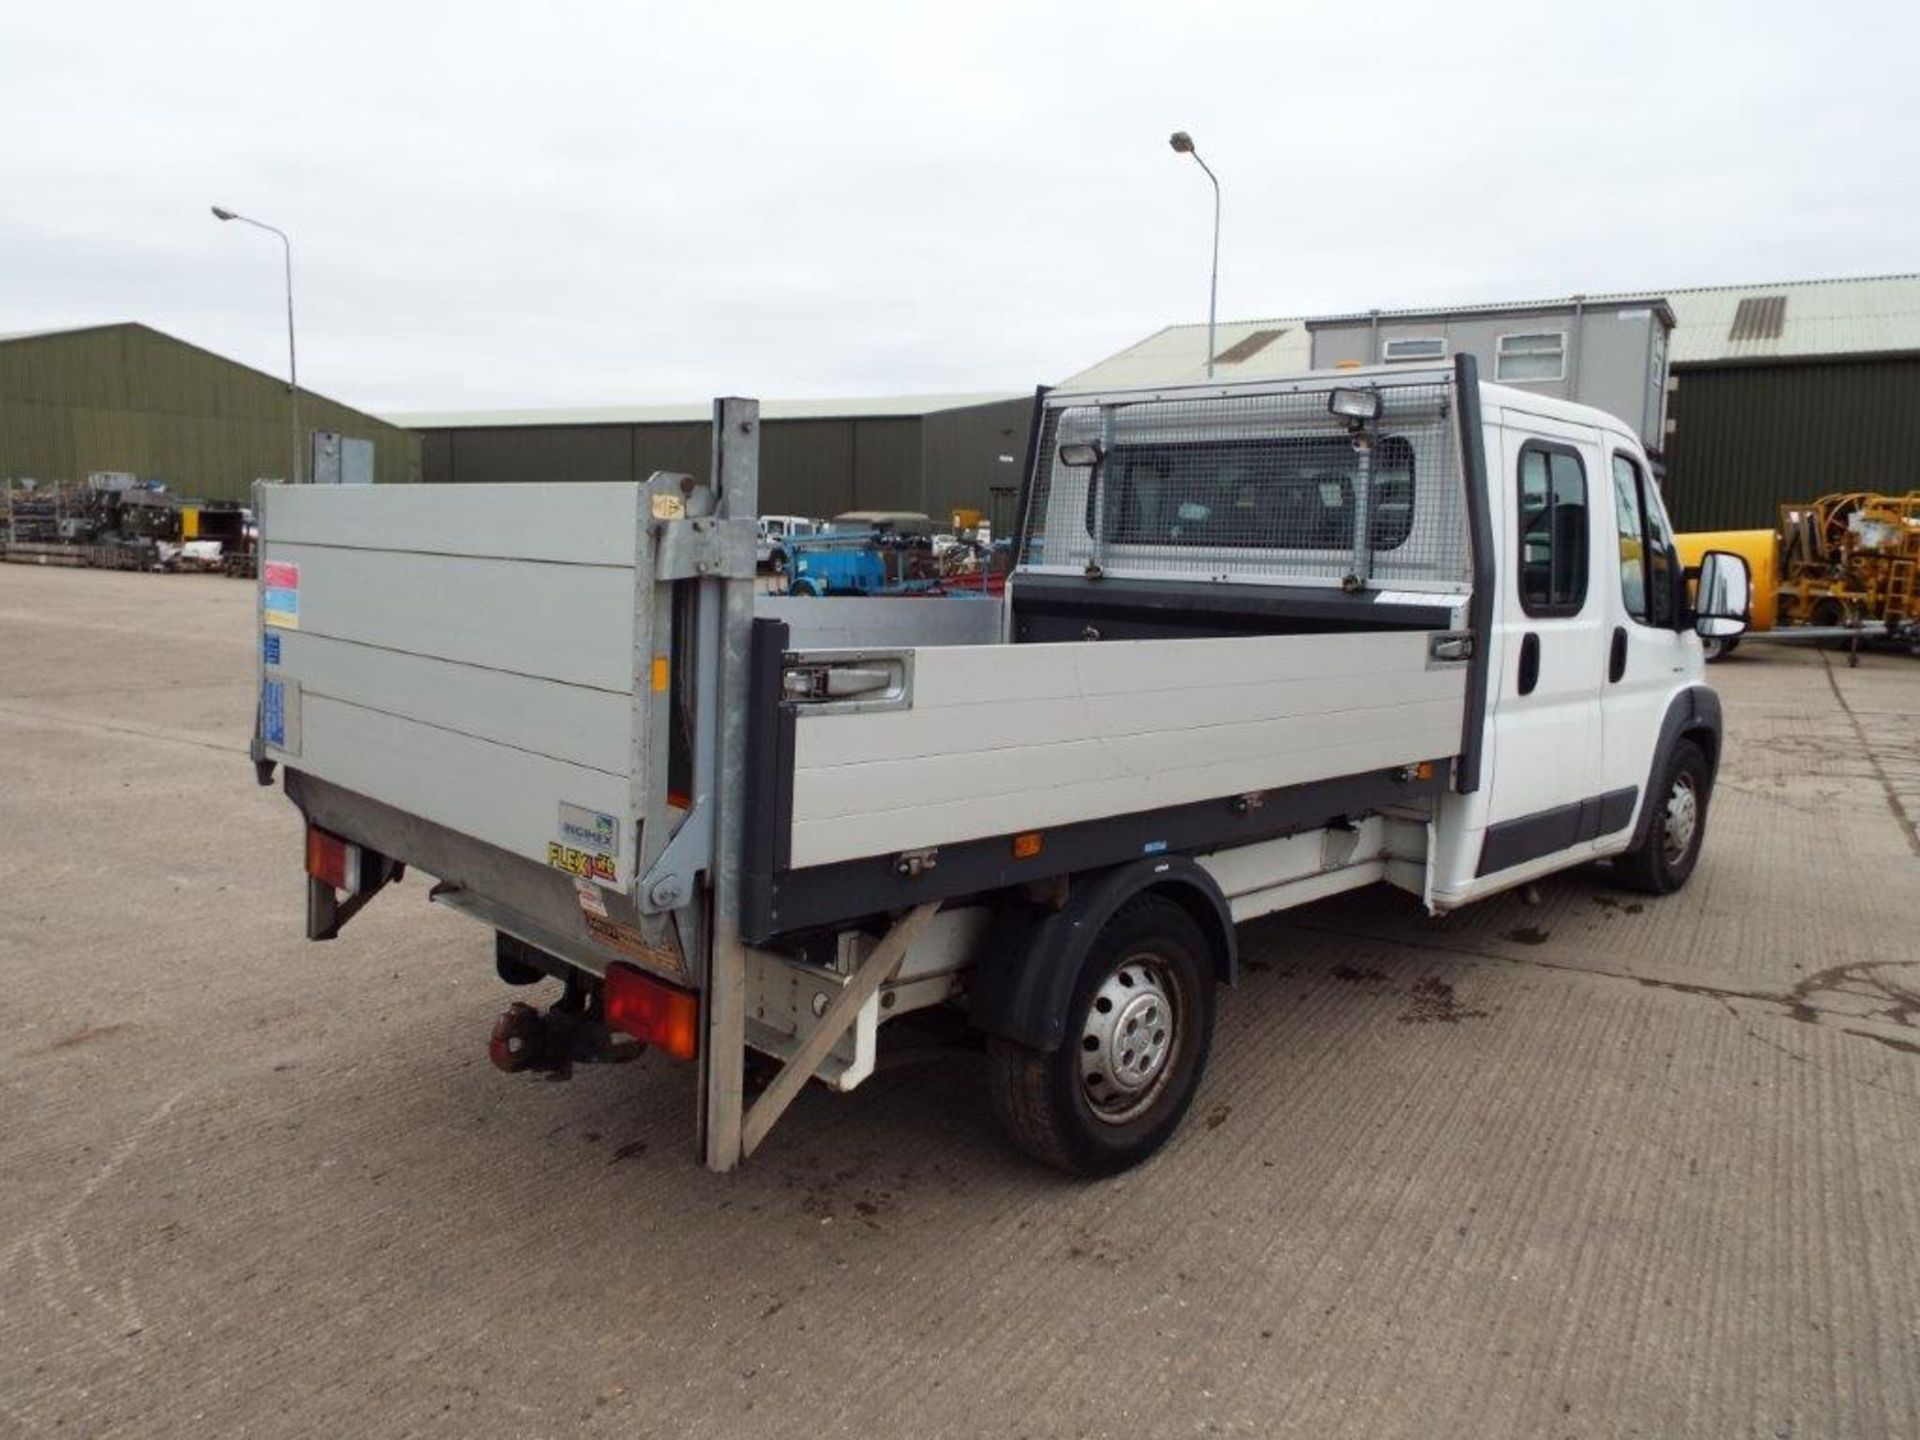 Citroen Relay 7 Seater Double Cab Dropside Pickup with 500kg Ratcliff Palfinger Tail Lift - Image 7 of 29